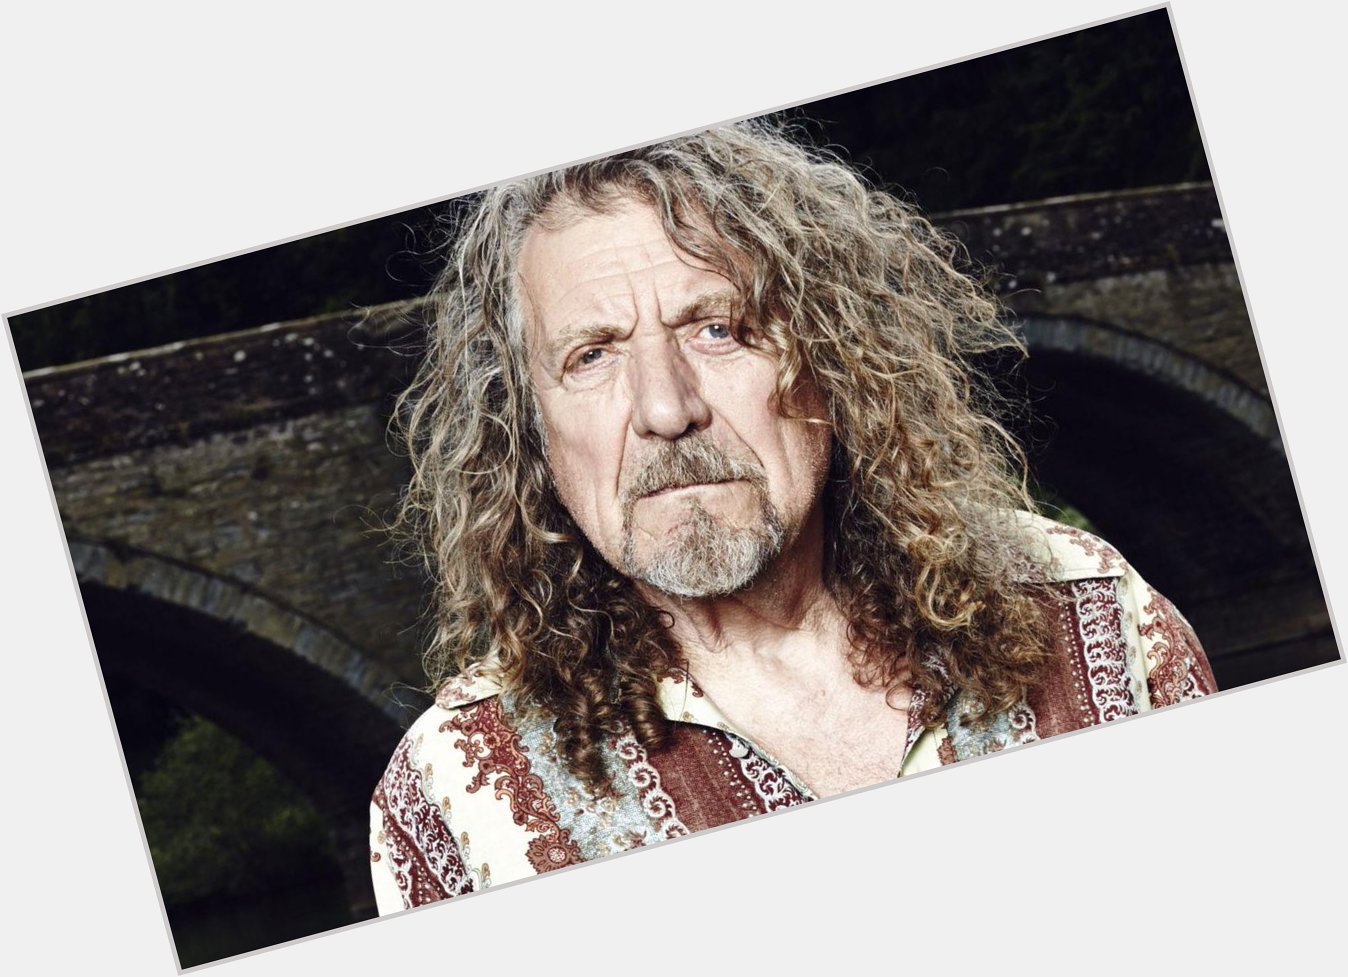 Happy birthday to the one and only RobertPlant  